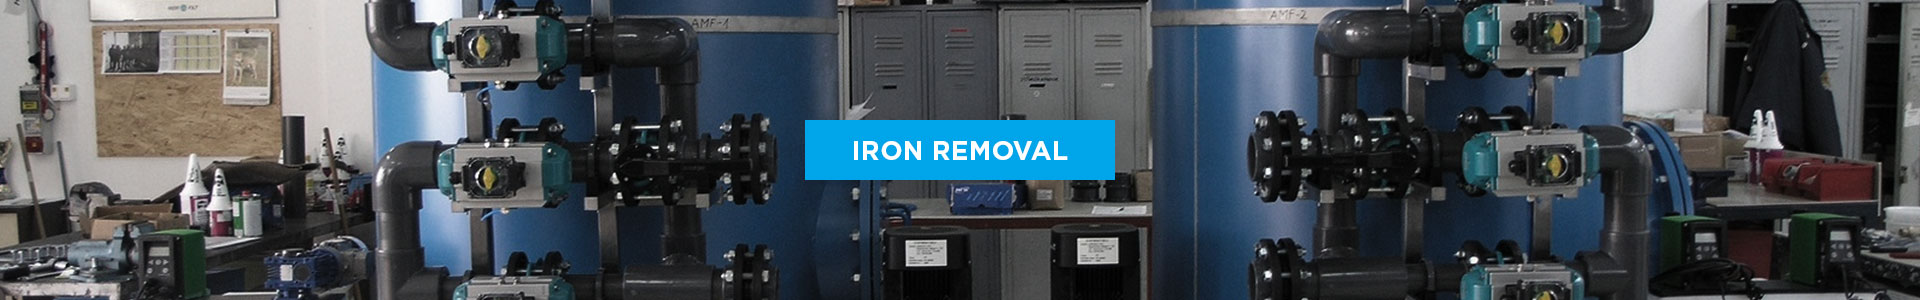 Iron Removal